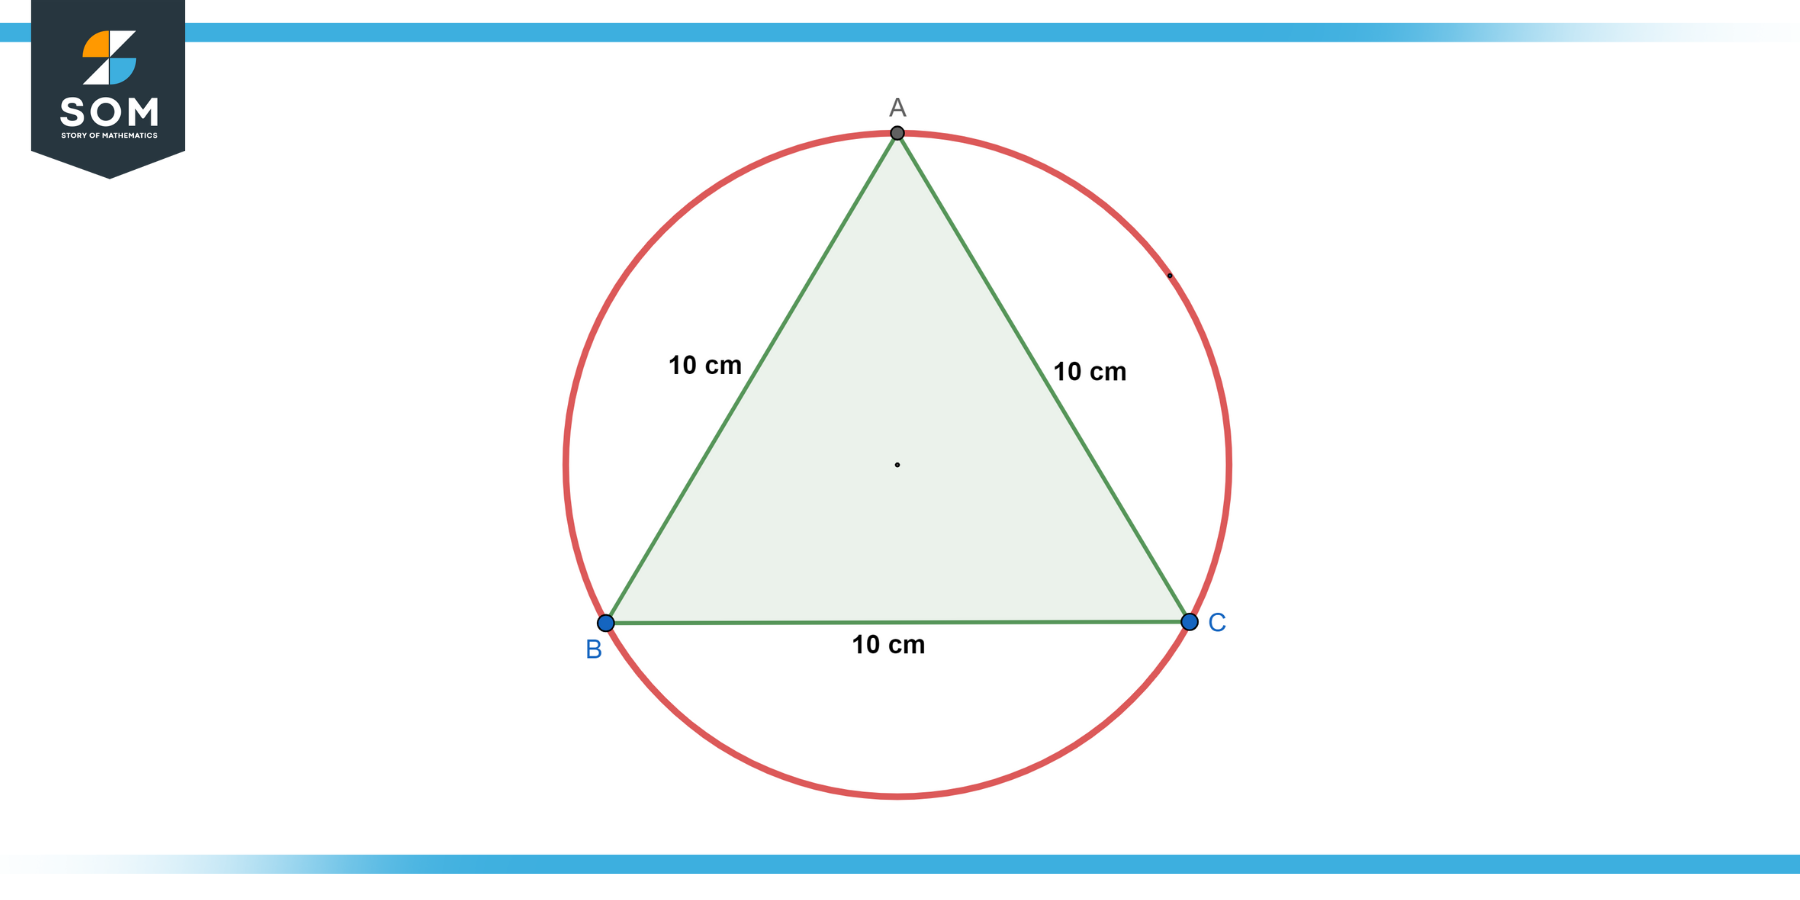 Equiletral triangle ABC with each side equals 10cm inside a circle